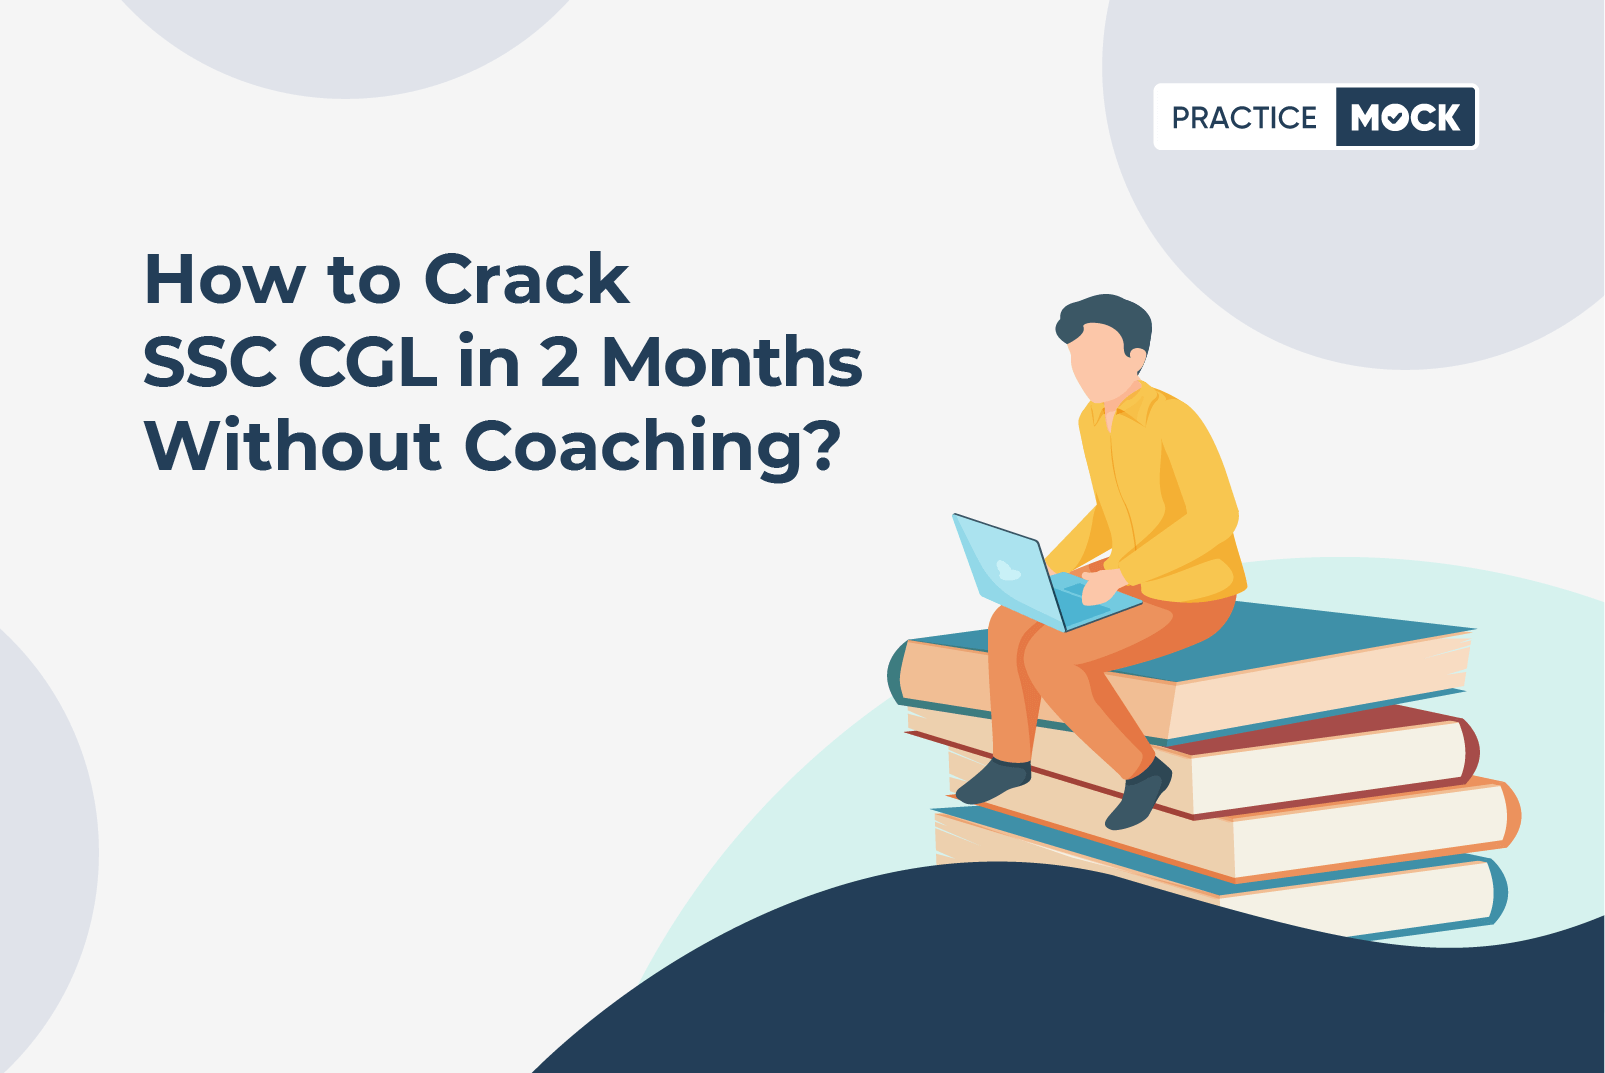 How to Crack SSC CGL in 2 Months Without Coaching?